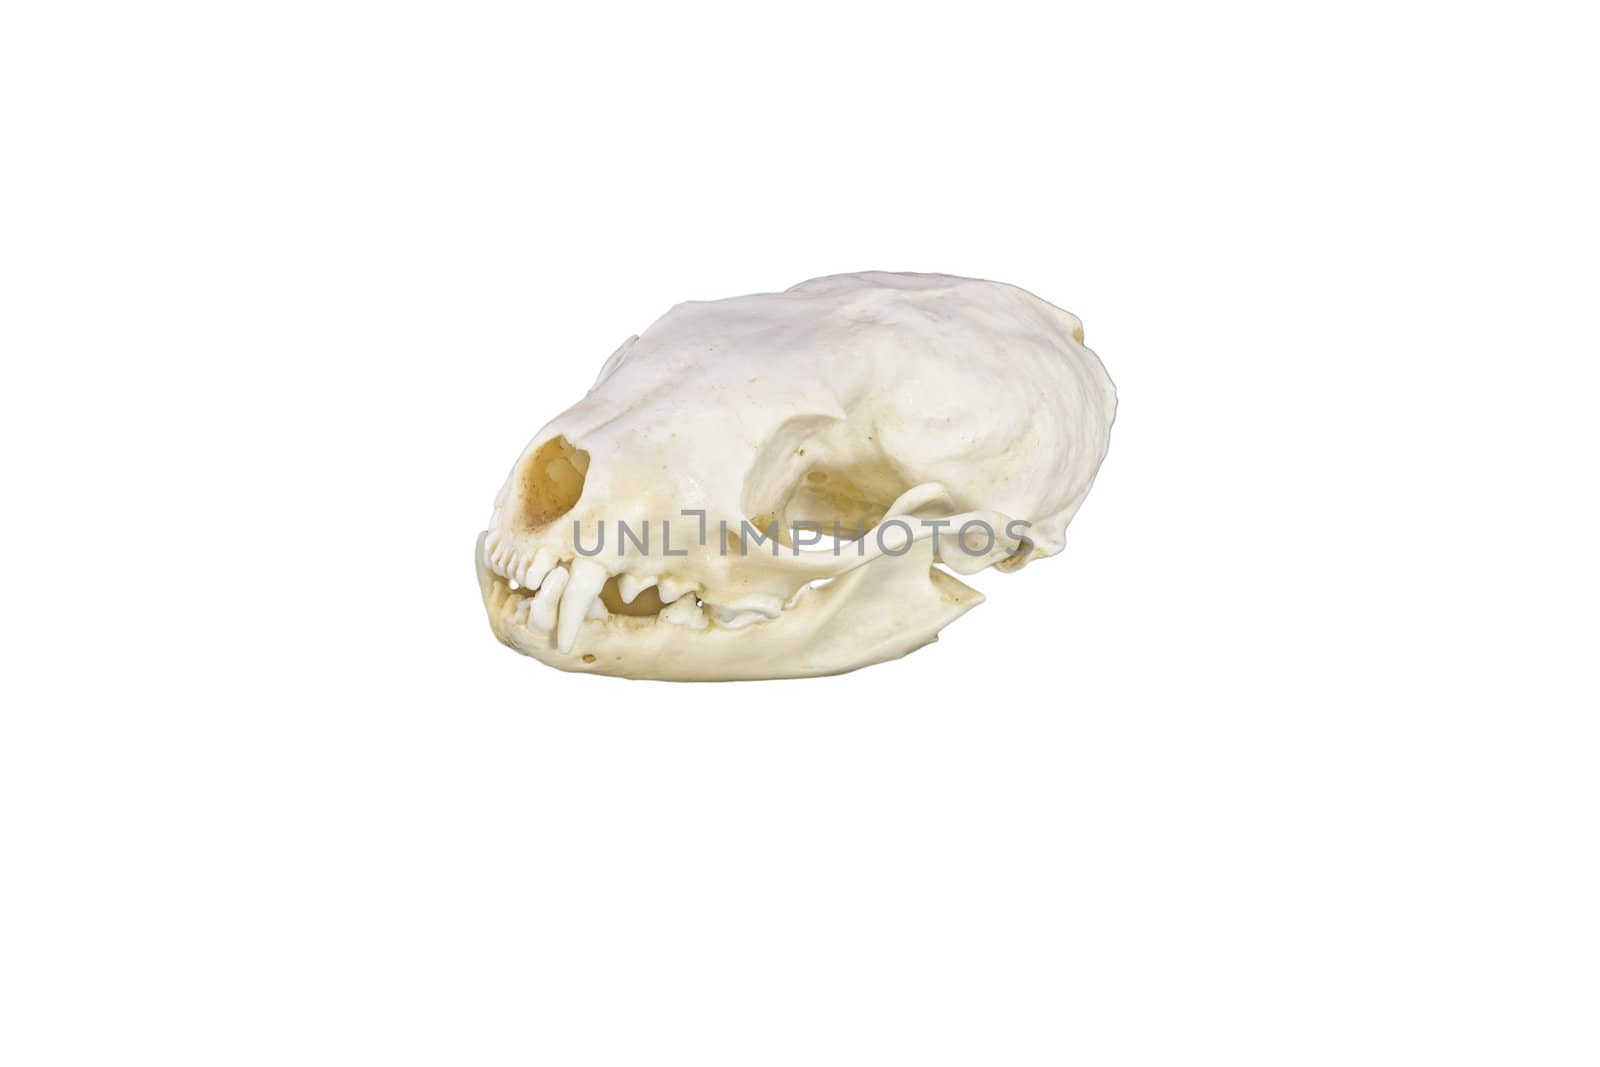 A marten skull in side view isolated on white background 